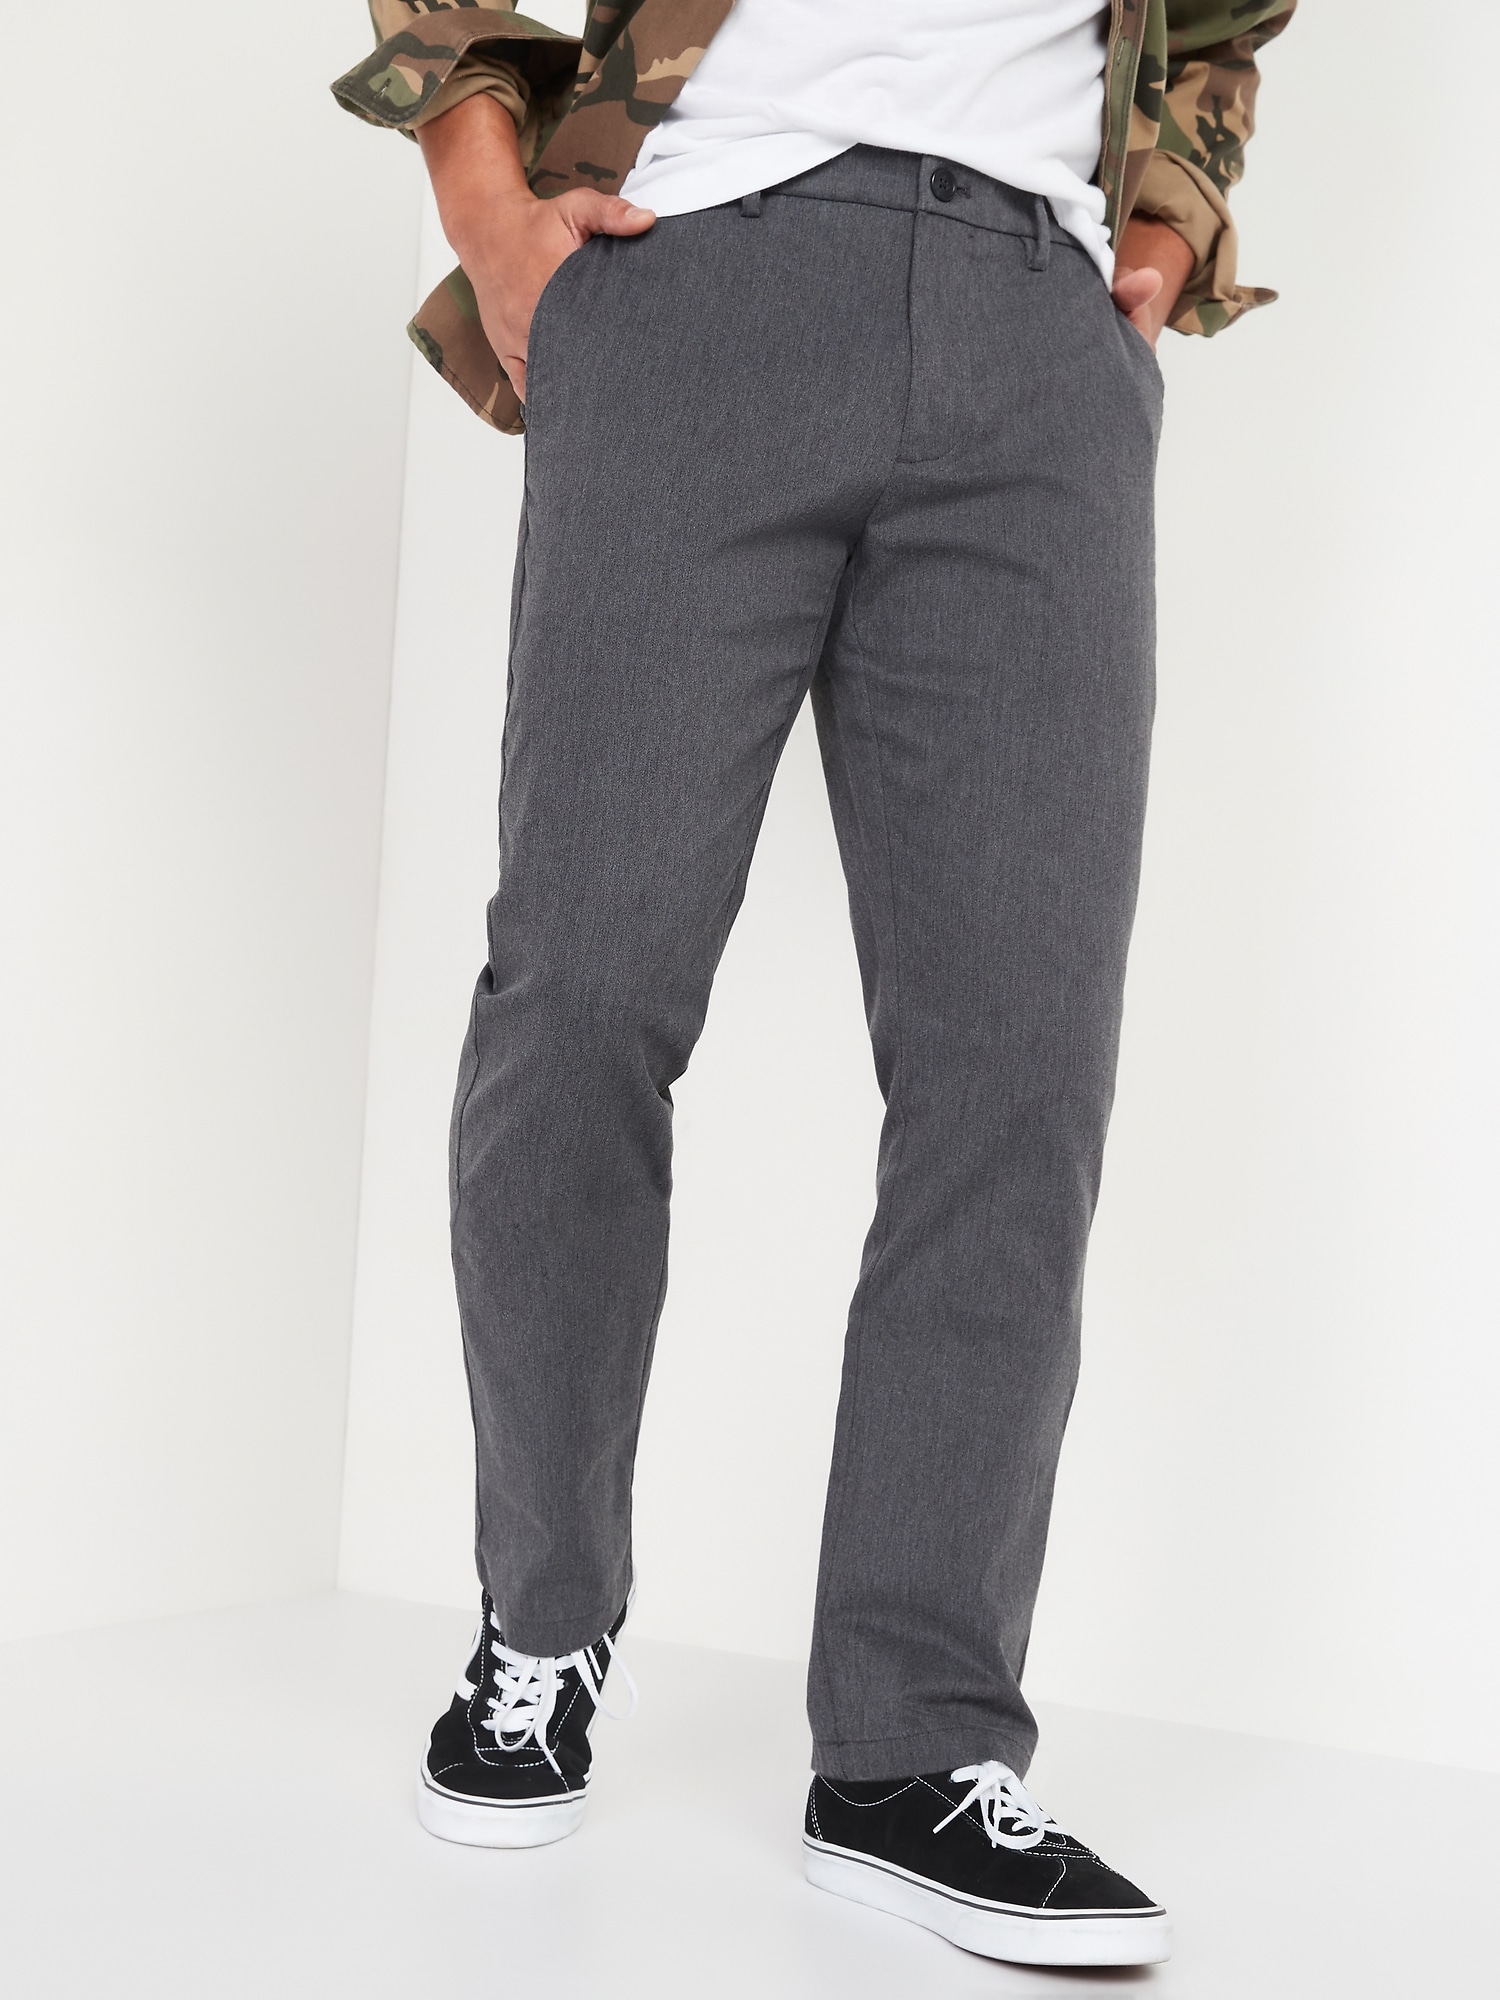 Straight Ultimate Built In Flex Chino Pants For Men Old Navy